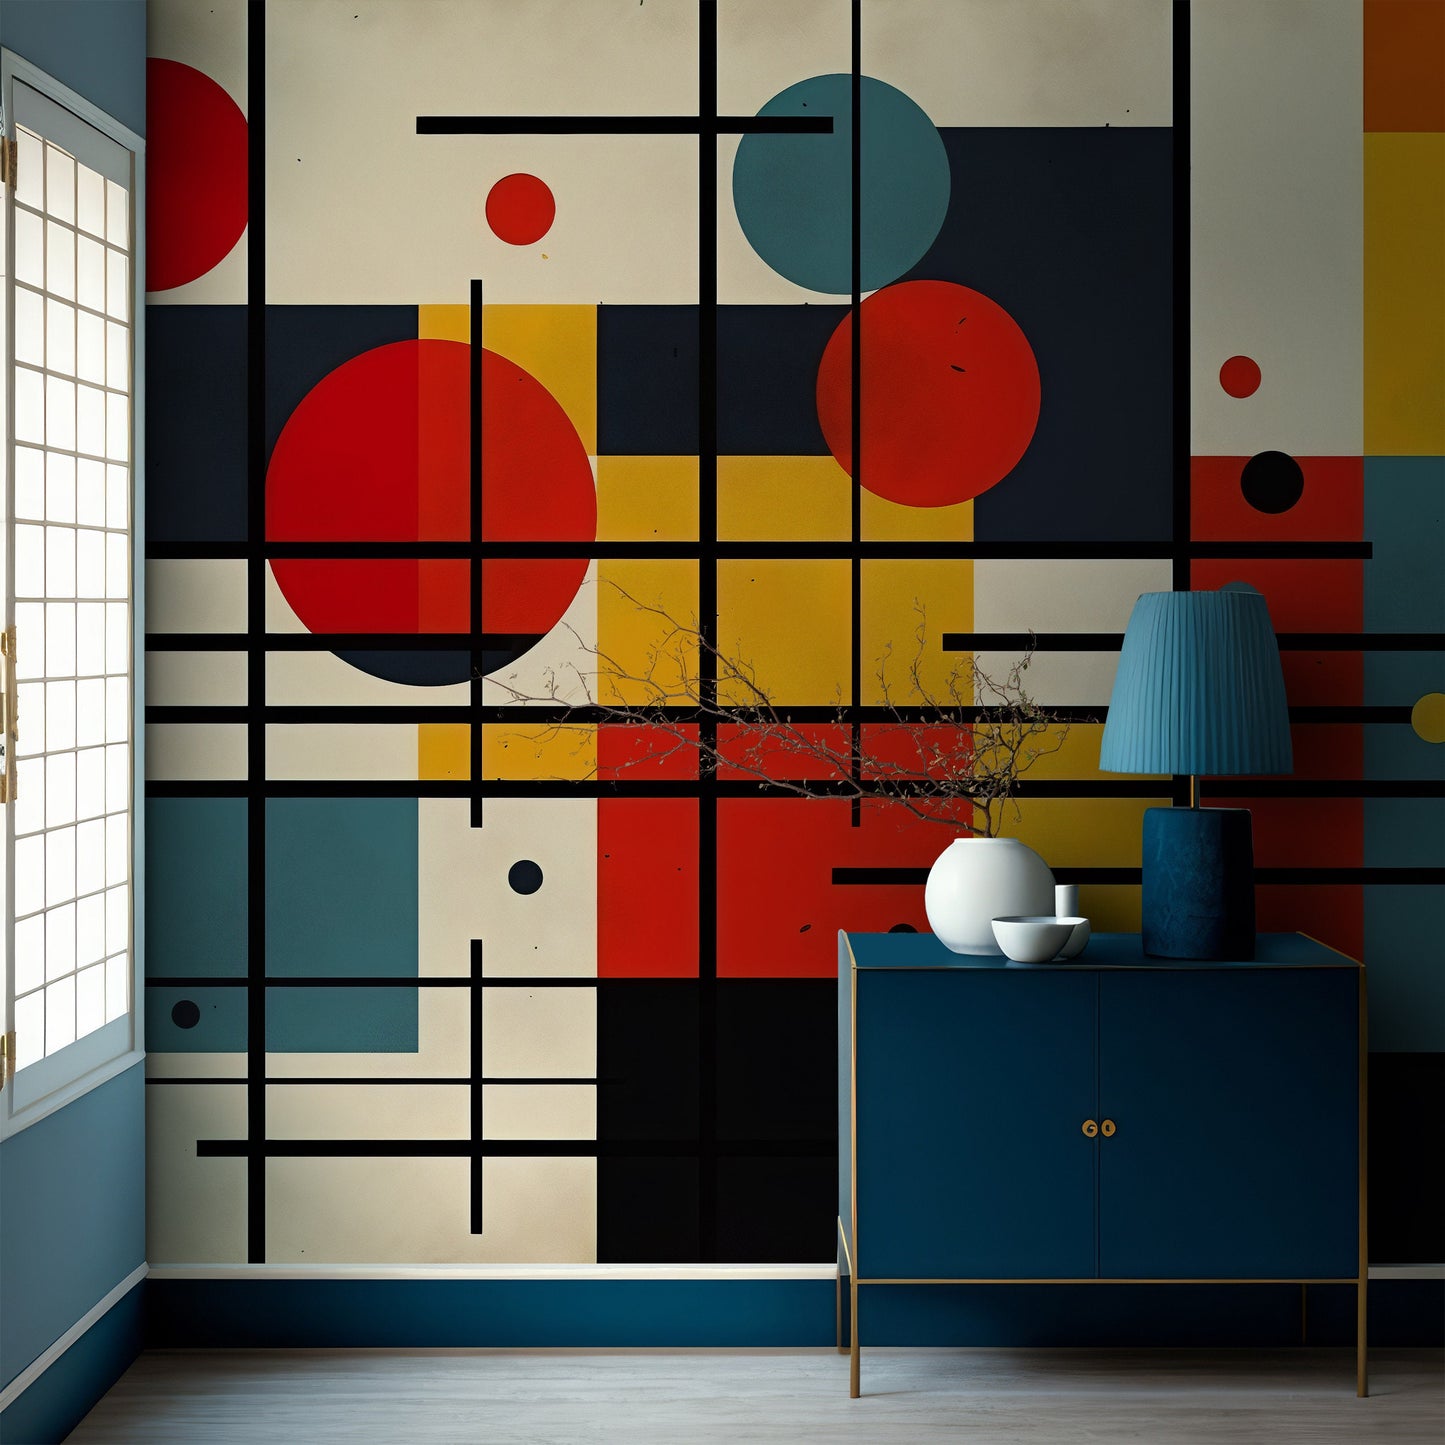 Mondrian Wallpaper | Colourful Geometric Removable Wallpaper | Abstract Art Peel and Stick Wallpaper | Geometrical Colorful Mural | PVC Free